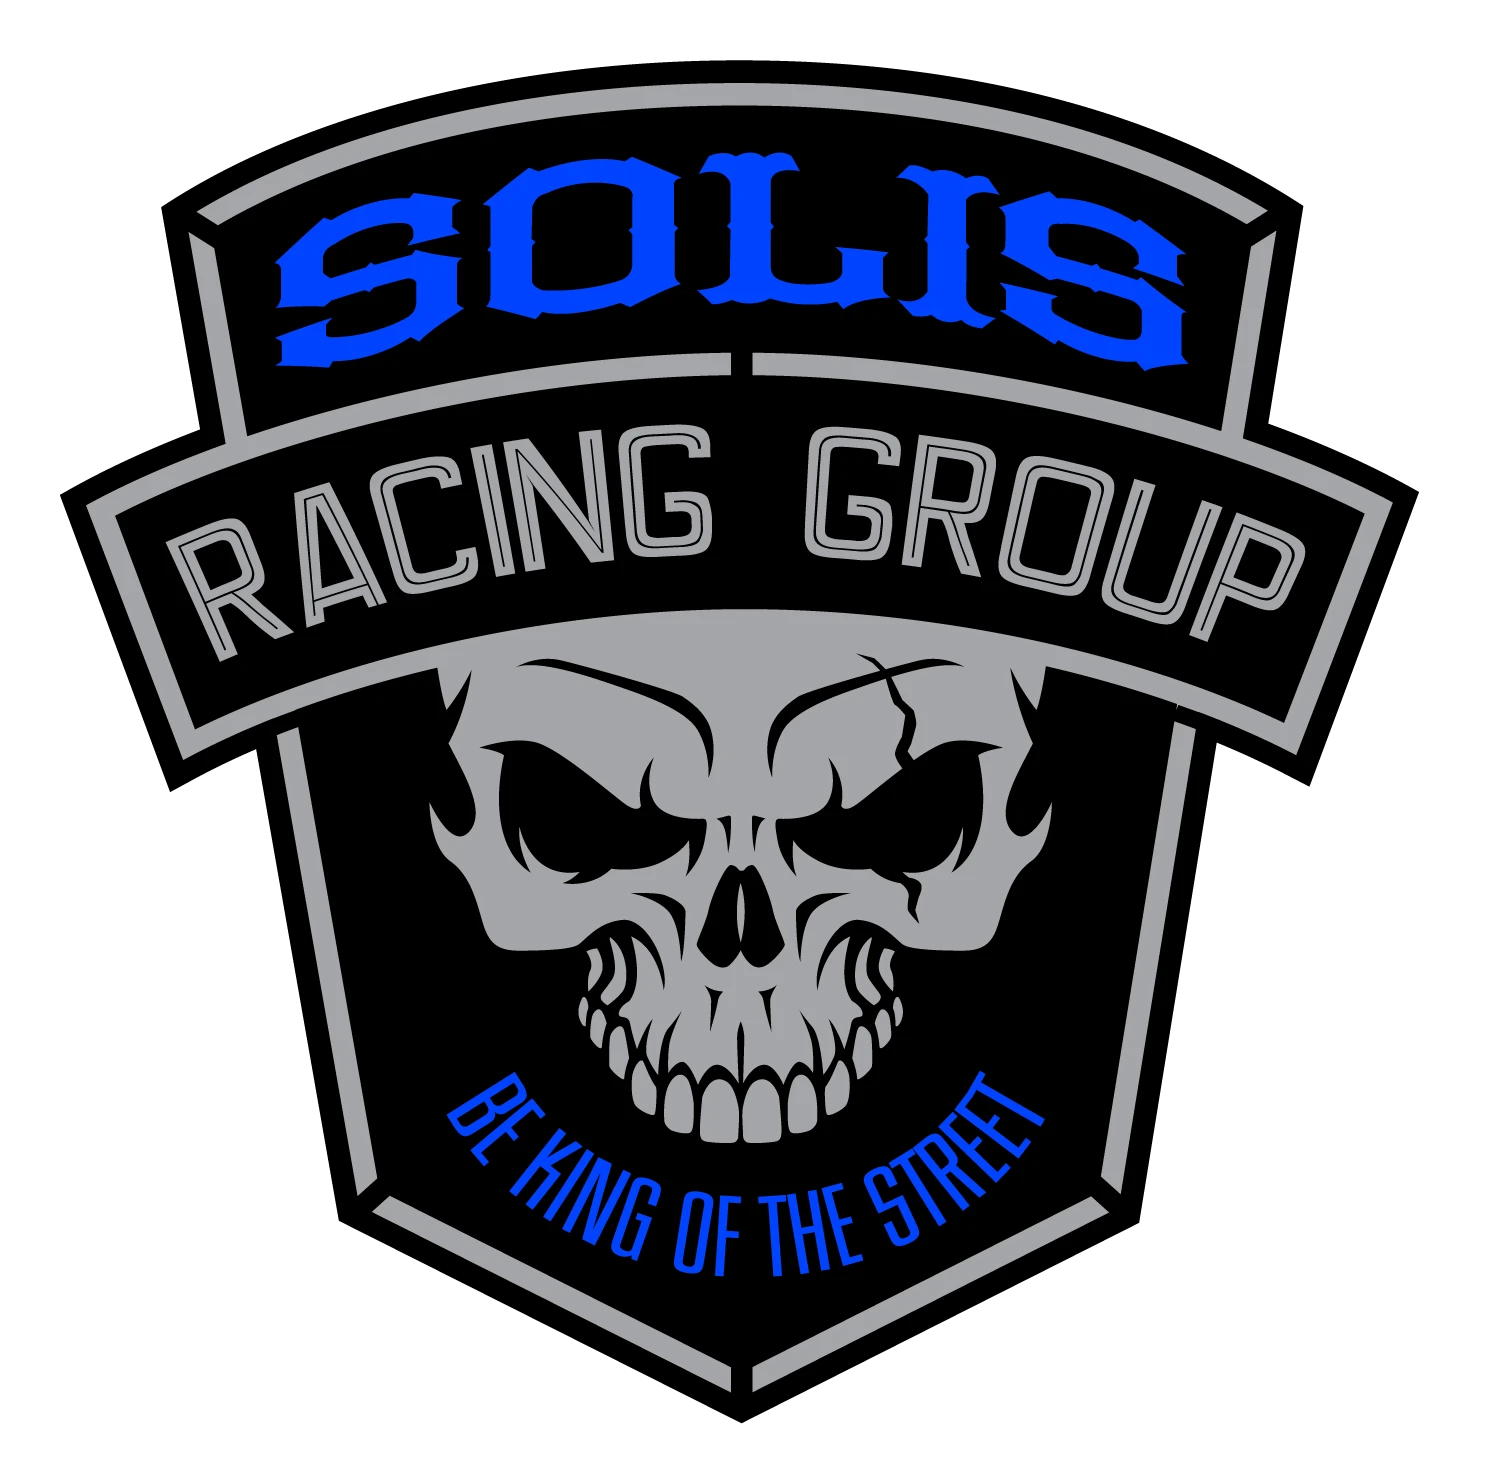 Score Up To 15% On Current Specials At Solis Racing Group